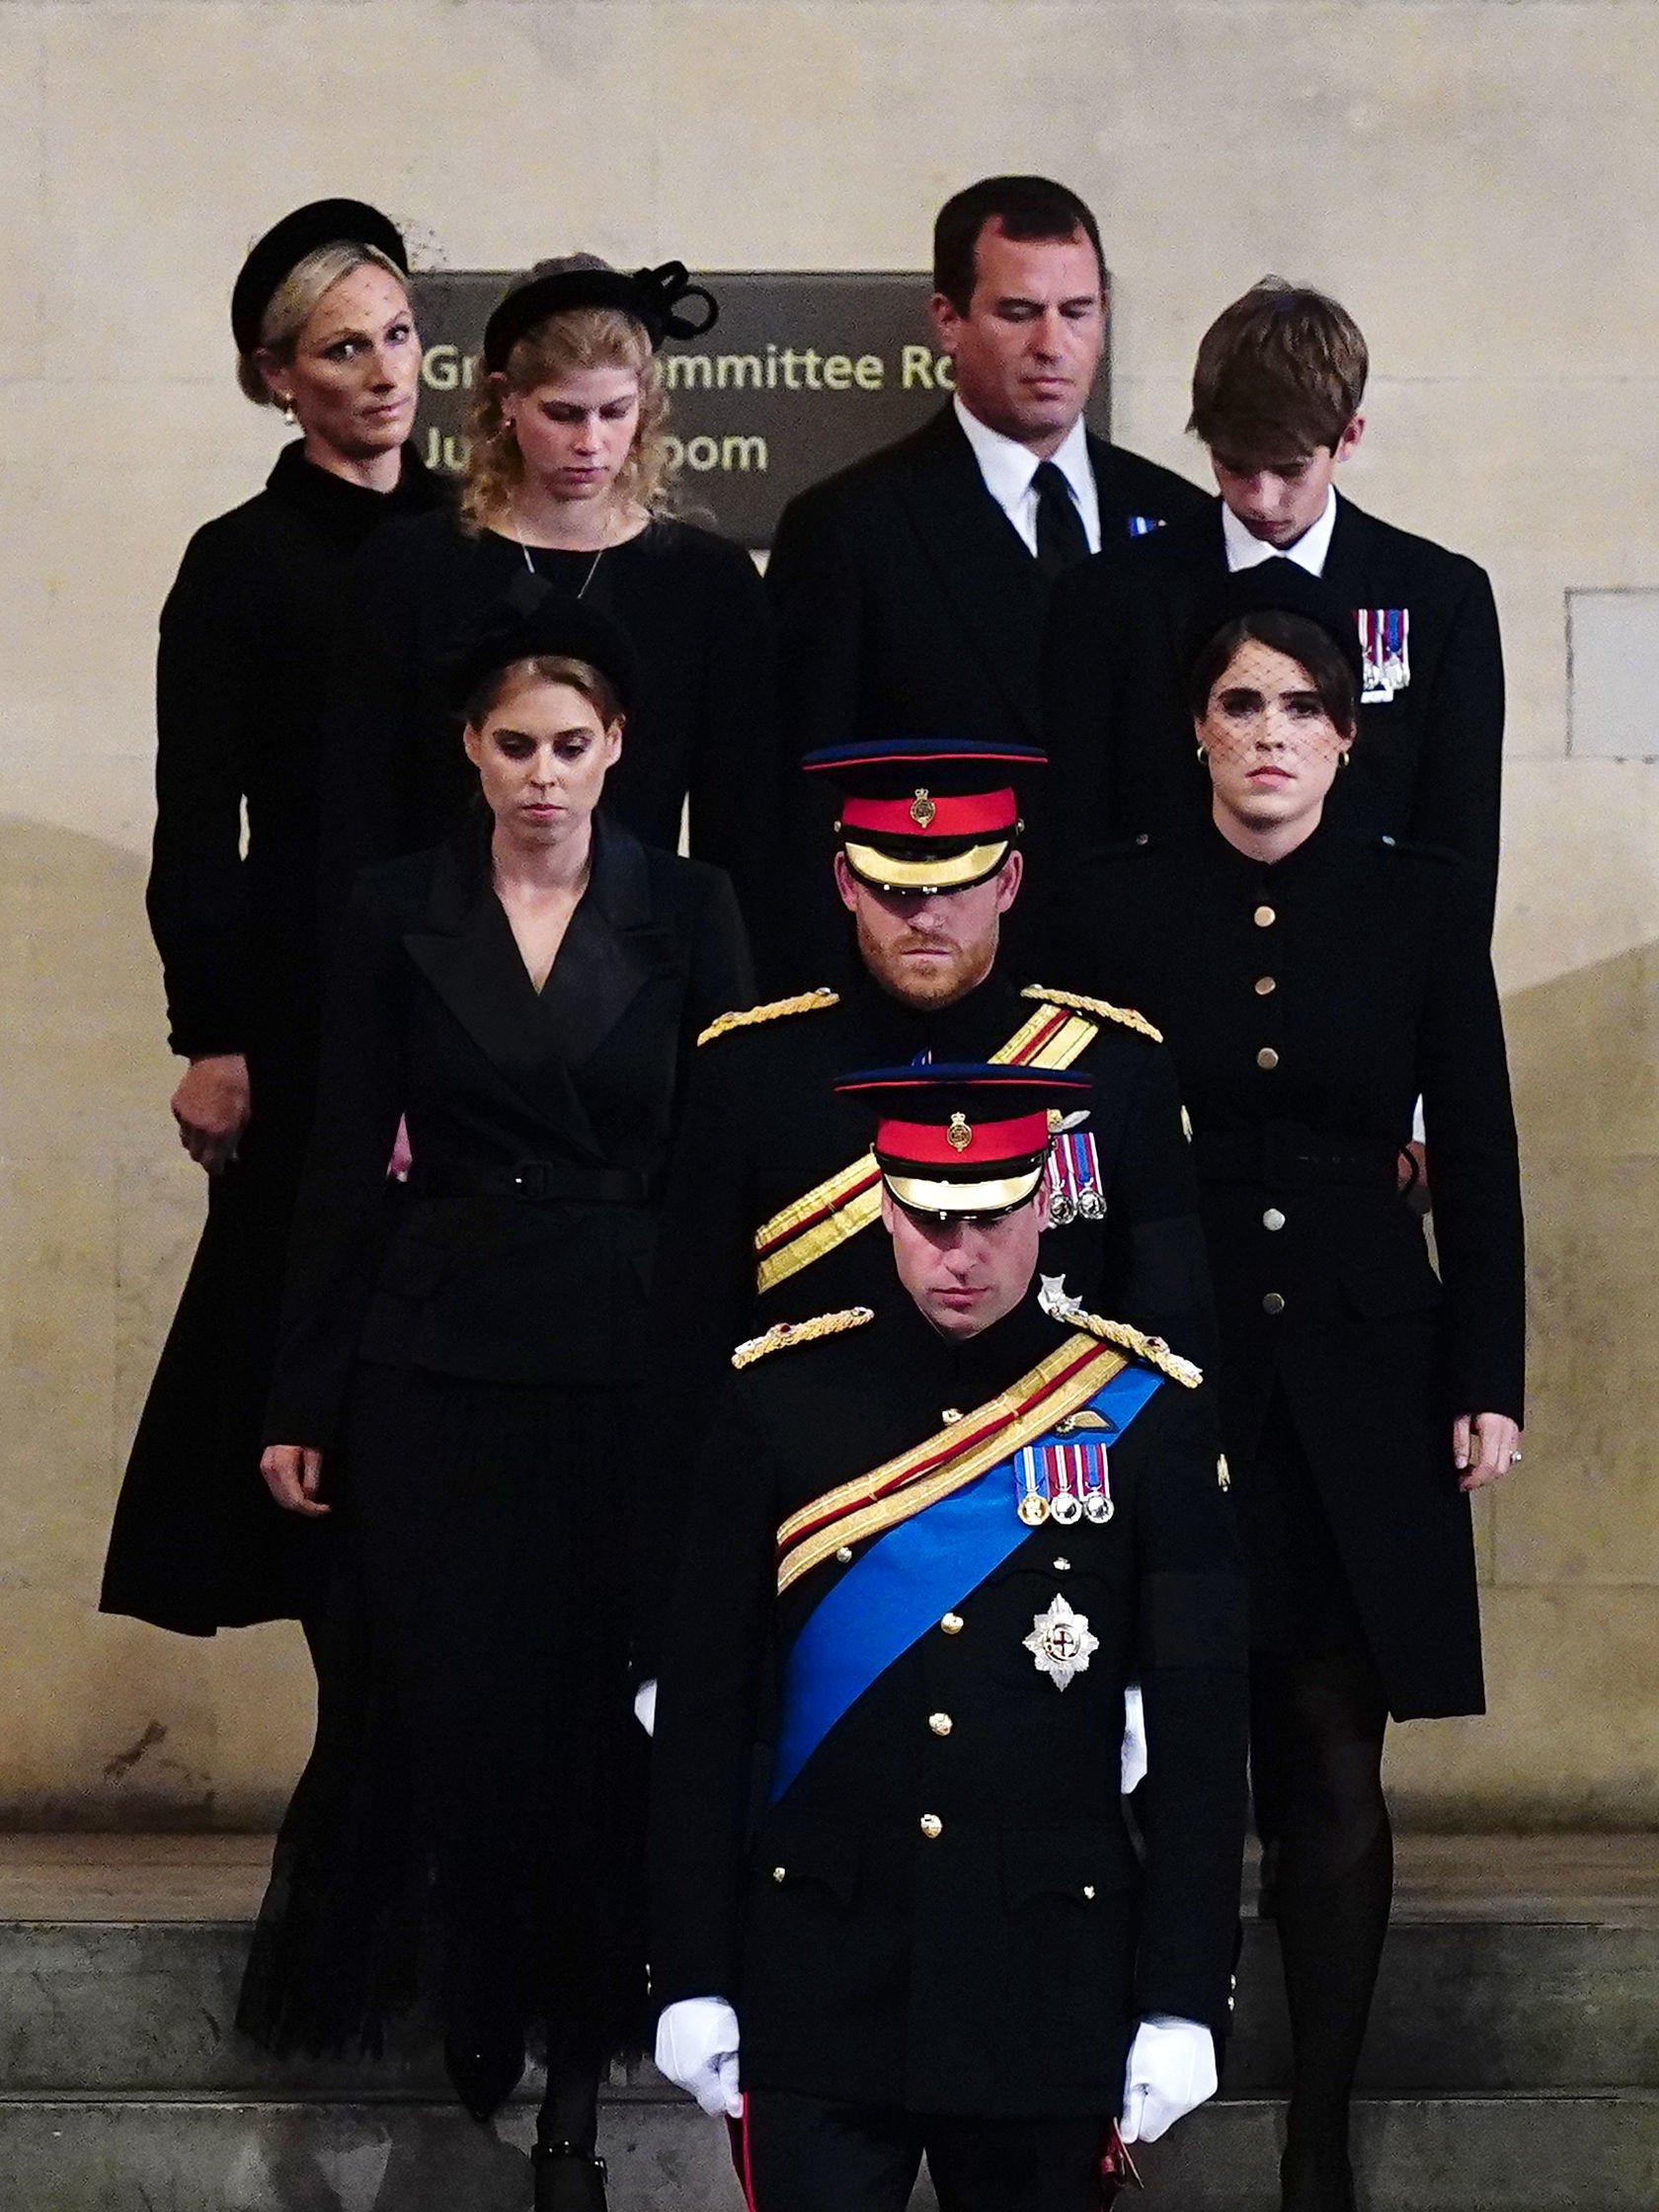 Prince William, Prince Harry, Princess Eugenie, Princess Beatrice, Peter Phillips, Zara Tindall, Lady Louise Windsor, and James, Viscount Severn hold a vigil in honor of Queen Elizabeth II at Westminster Hall on September 17, 2022, in London, England | Source: Getty Images